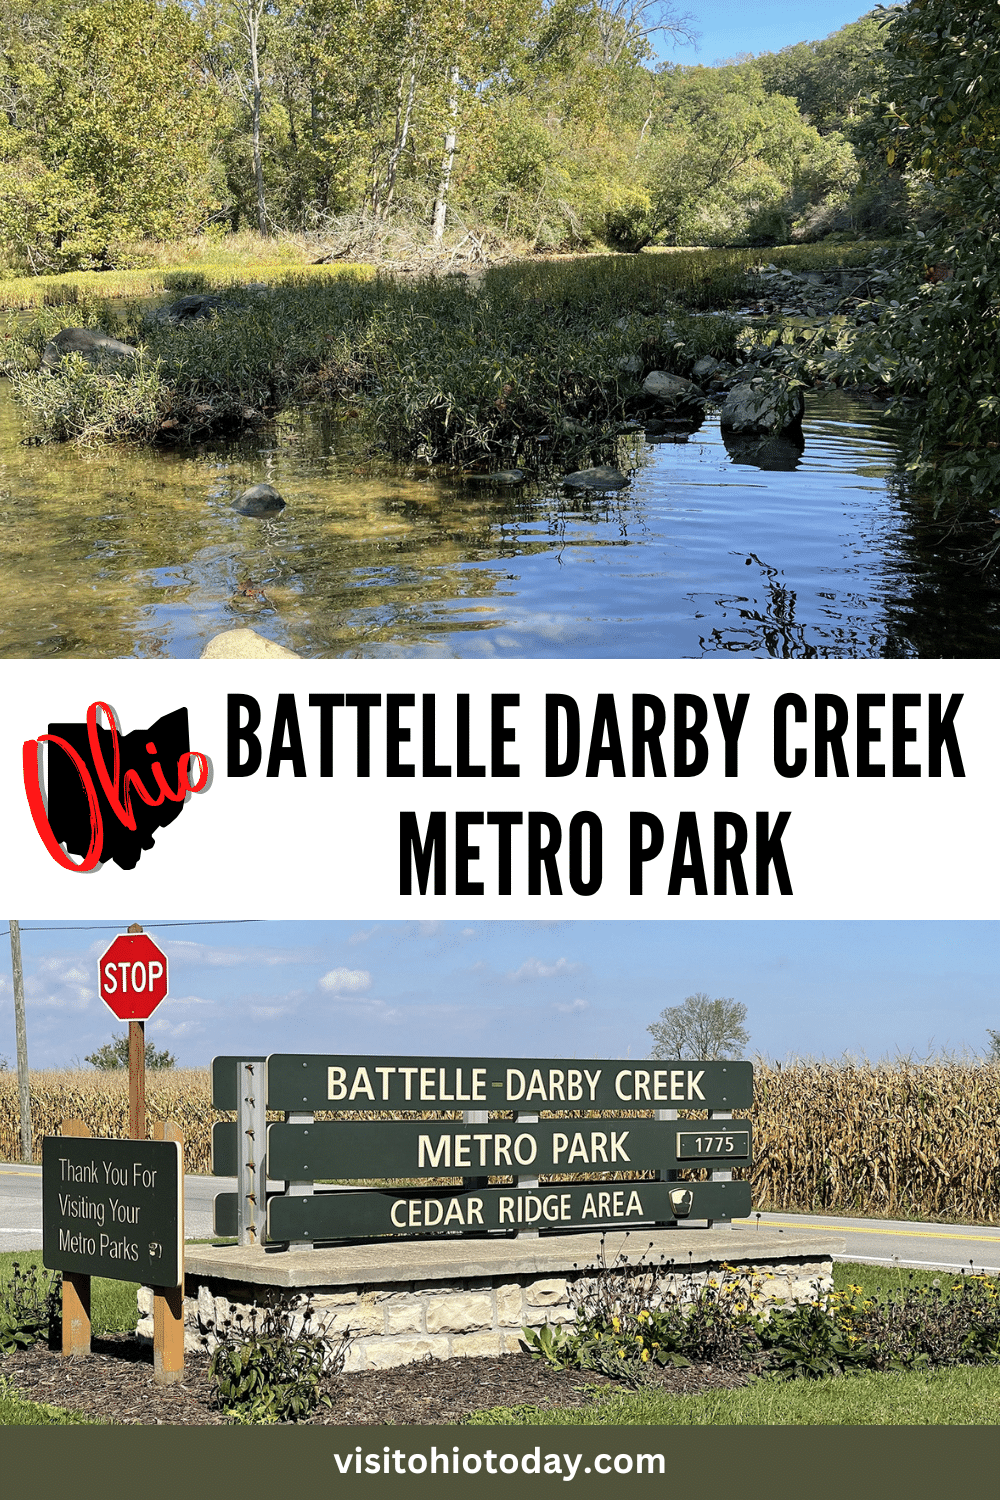 Battelle Darby Creek Metro Park is a huge park that covers over 7,000 acres of prairies, forests, and wetlands. Stretching along both Big and Little Darby Creeks, there are many activities available at Battelle Darby Creek Metro Park.